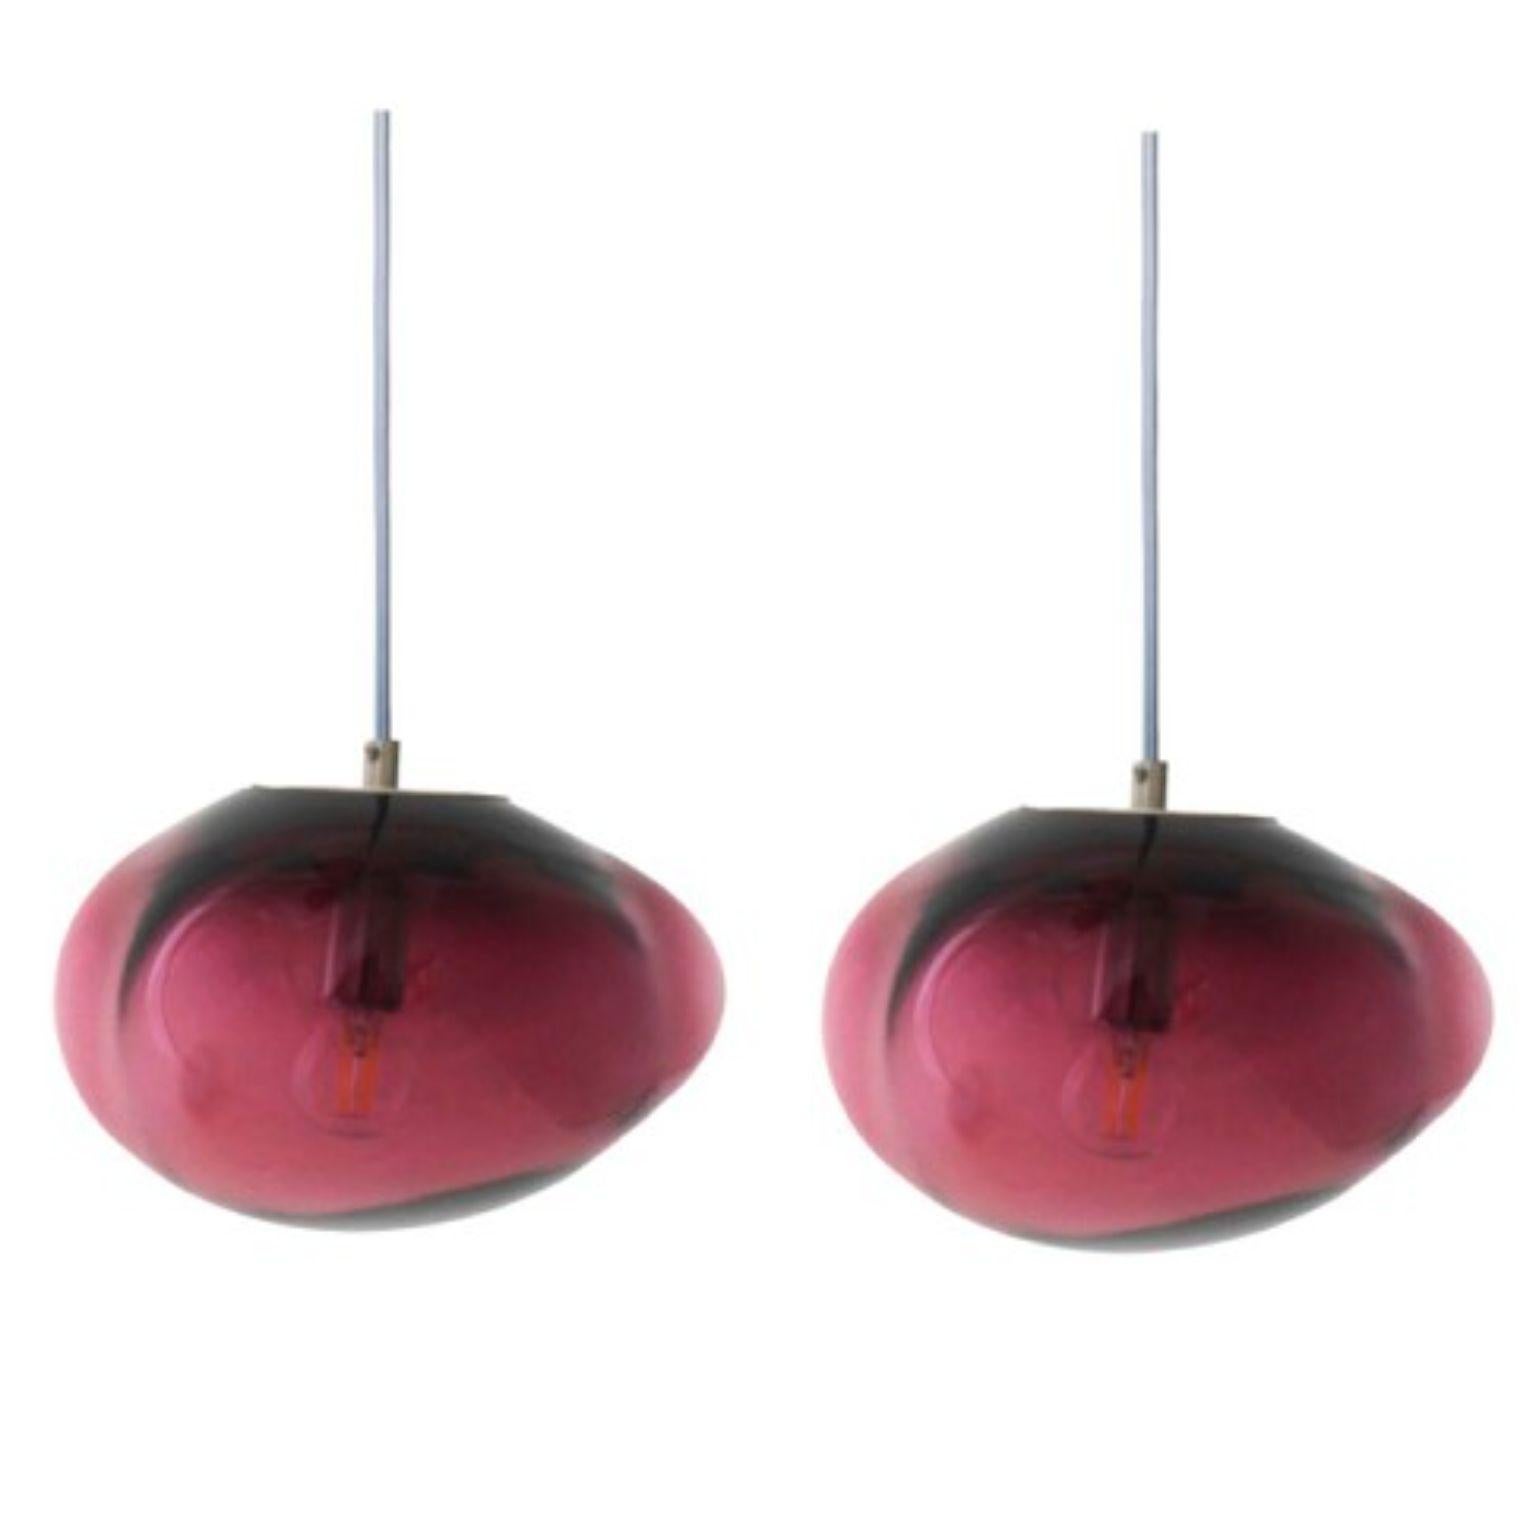 Set of 2 planetoide amor red pendants by Eloa.
No UL listed 
Material: glass, steel, silver, LED bulb.
Dimensions: D 30 x W 30 x H 250 cm.
Also available in different colours and dimensions.

All our lamps can be wired according to each country. If